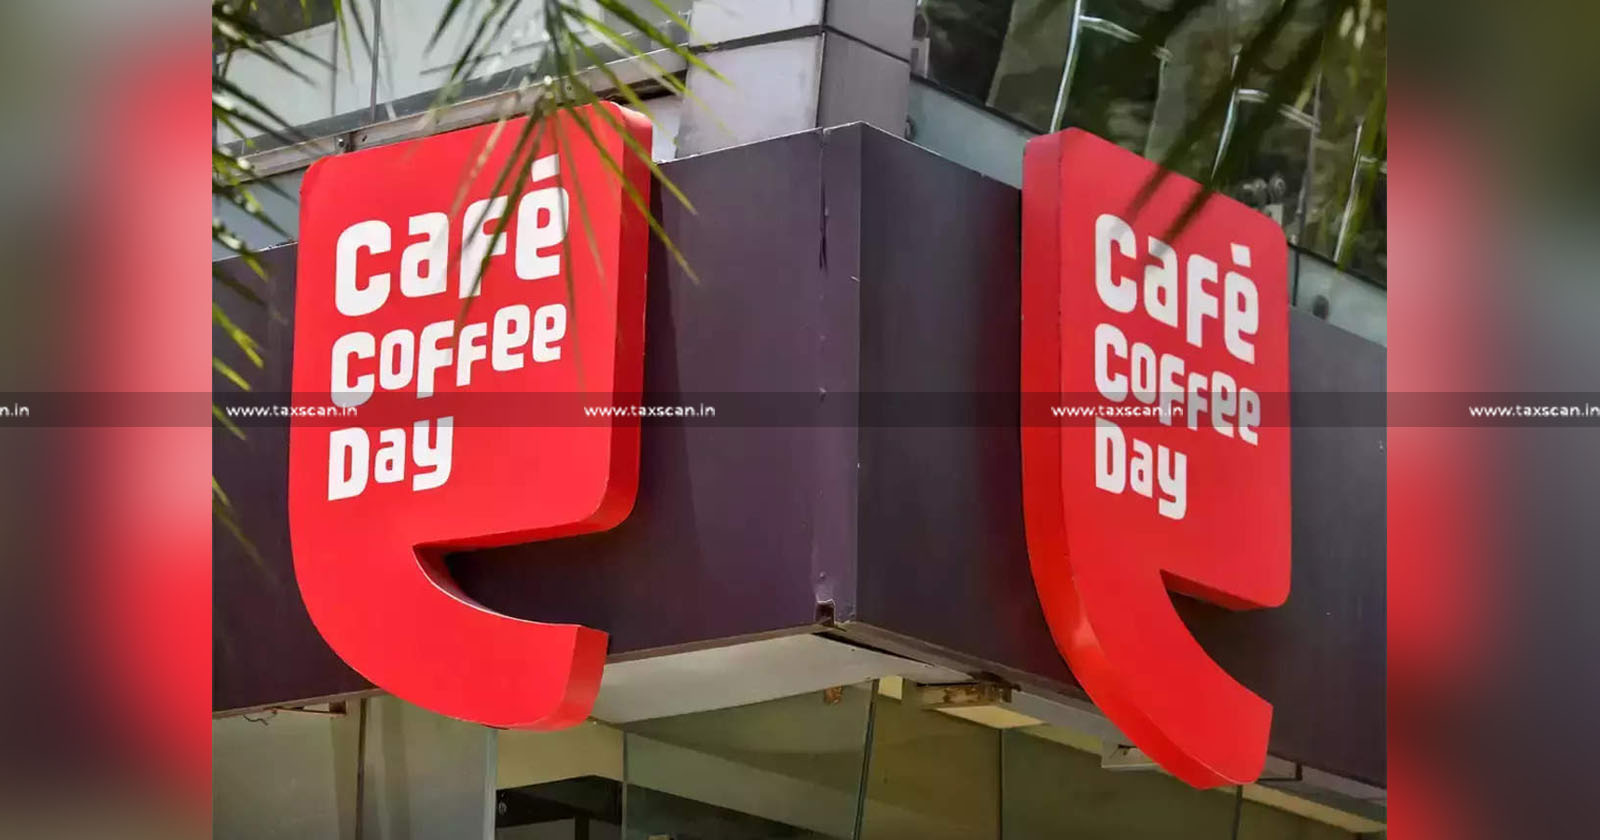 NFRA - imposes - NFRA imposes 1 Crore Penalty on Auditors of Cafe Coffee Day -cafe coffee day - taxscan